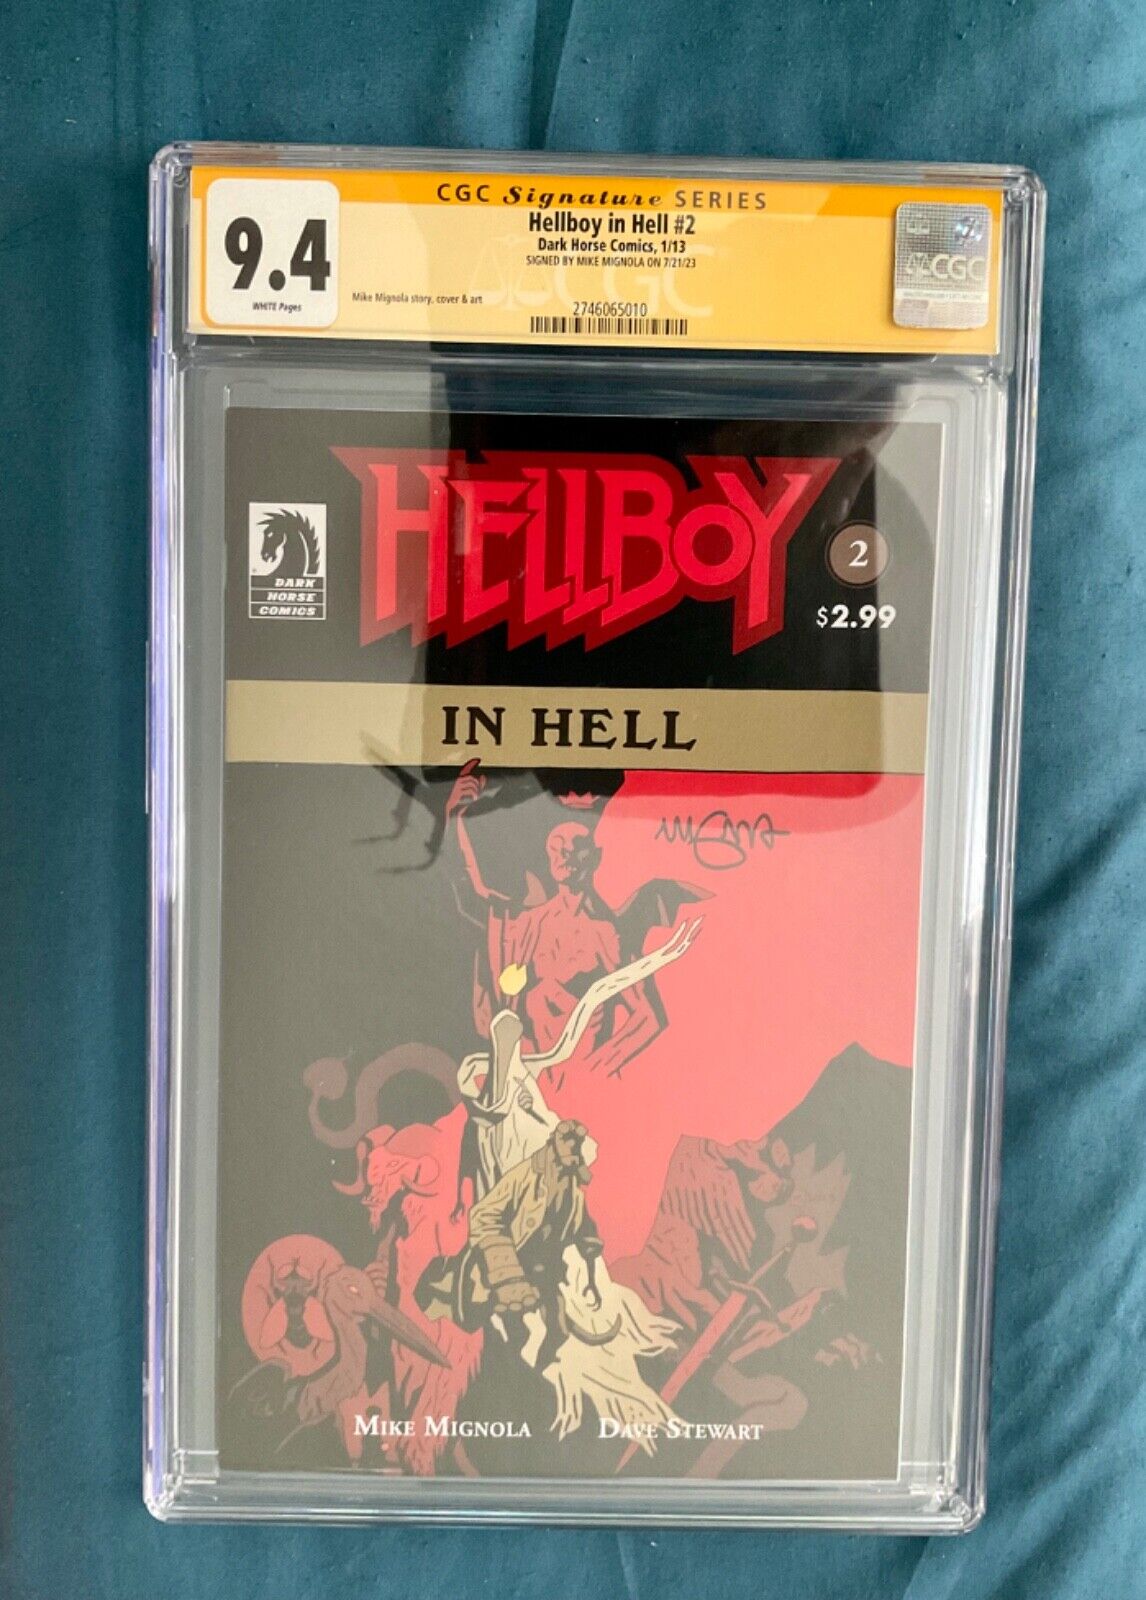 SIGNED MIKE MIGNOLA 9.4 CGC SS Hellboy in Hell 2 autographed batman Dracula 1 3